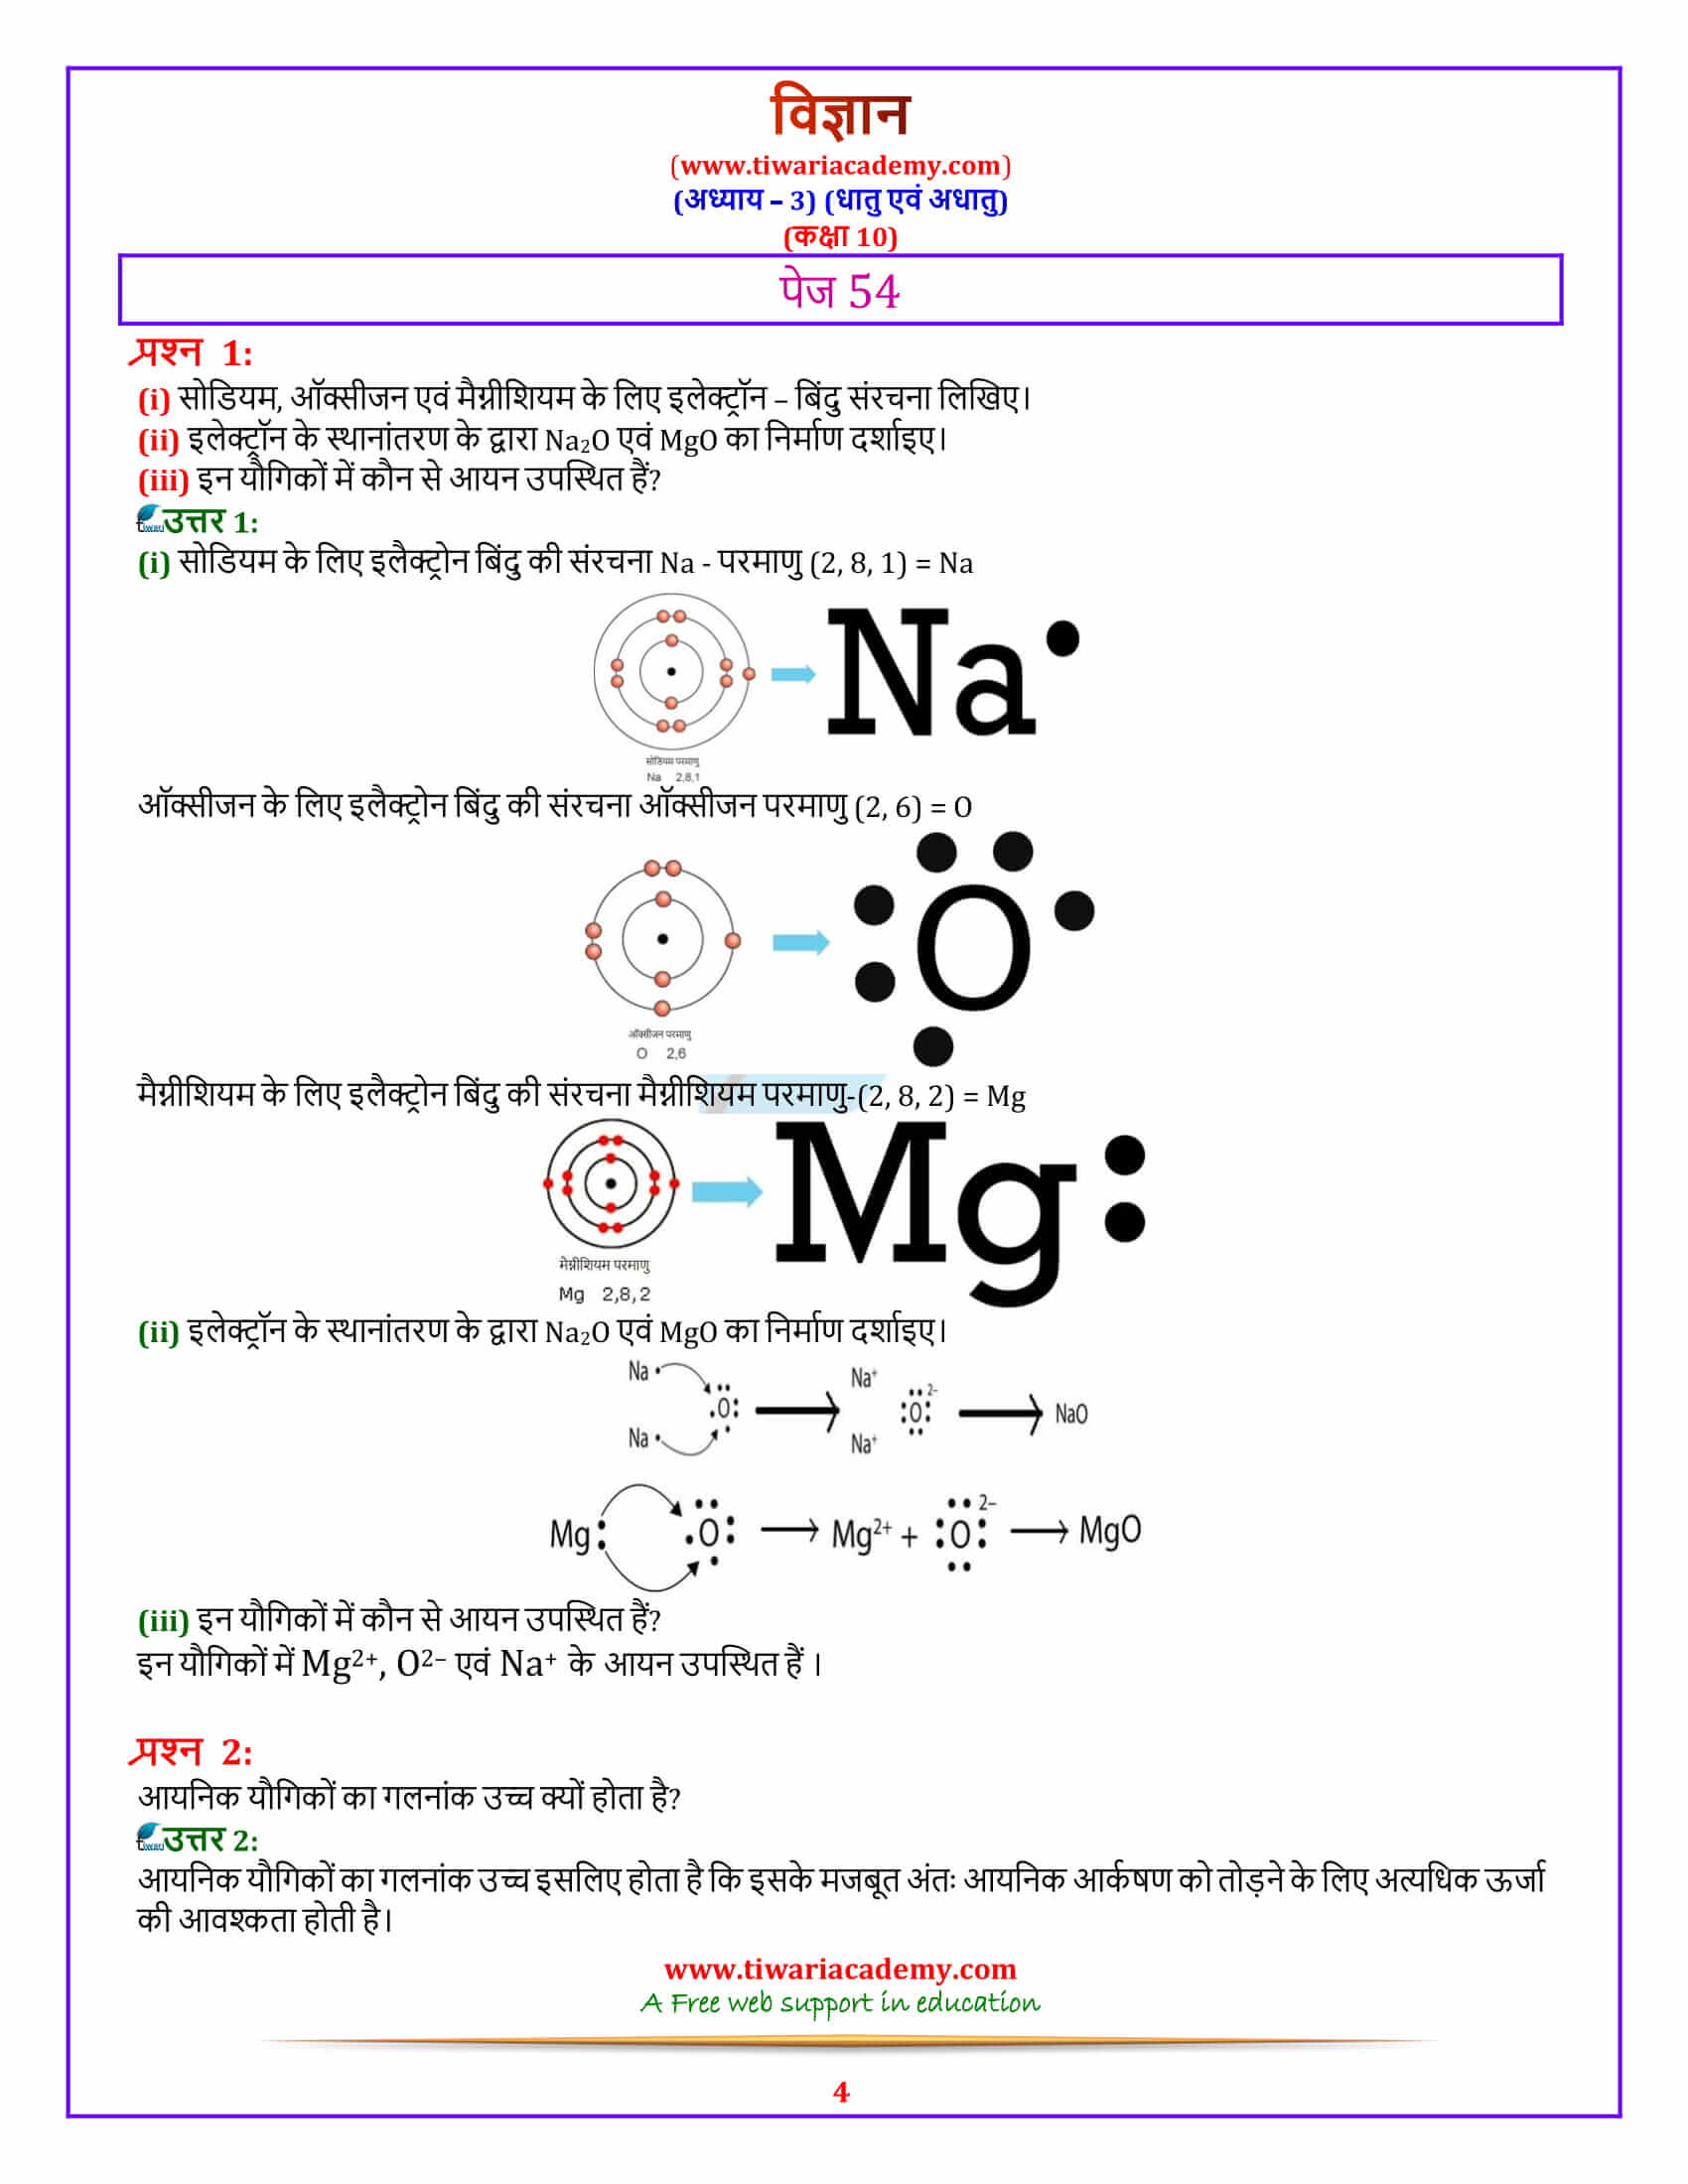 10 Science Chapter 3 Metals and Non-Metals पेज 54 के उत्तर